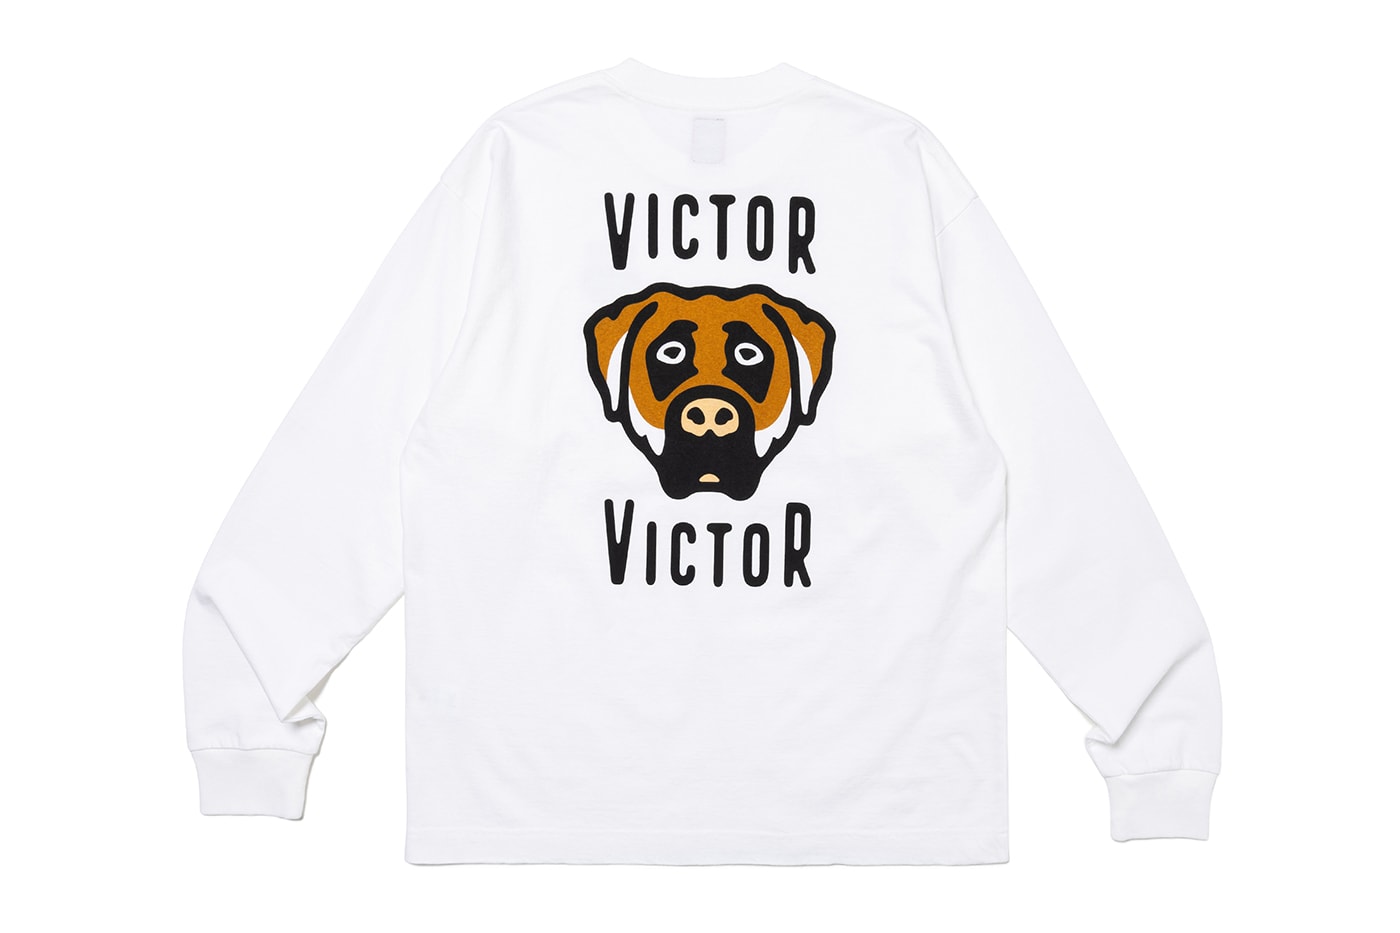 Victor Victor First Capsule Collection Release Info Date Buy Price 